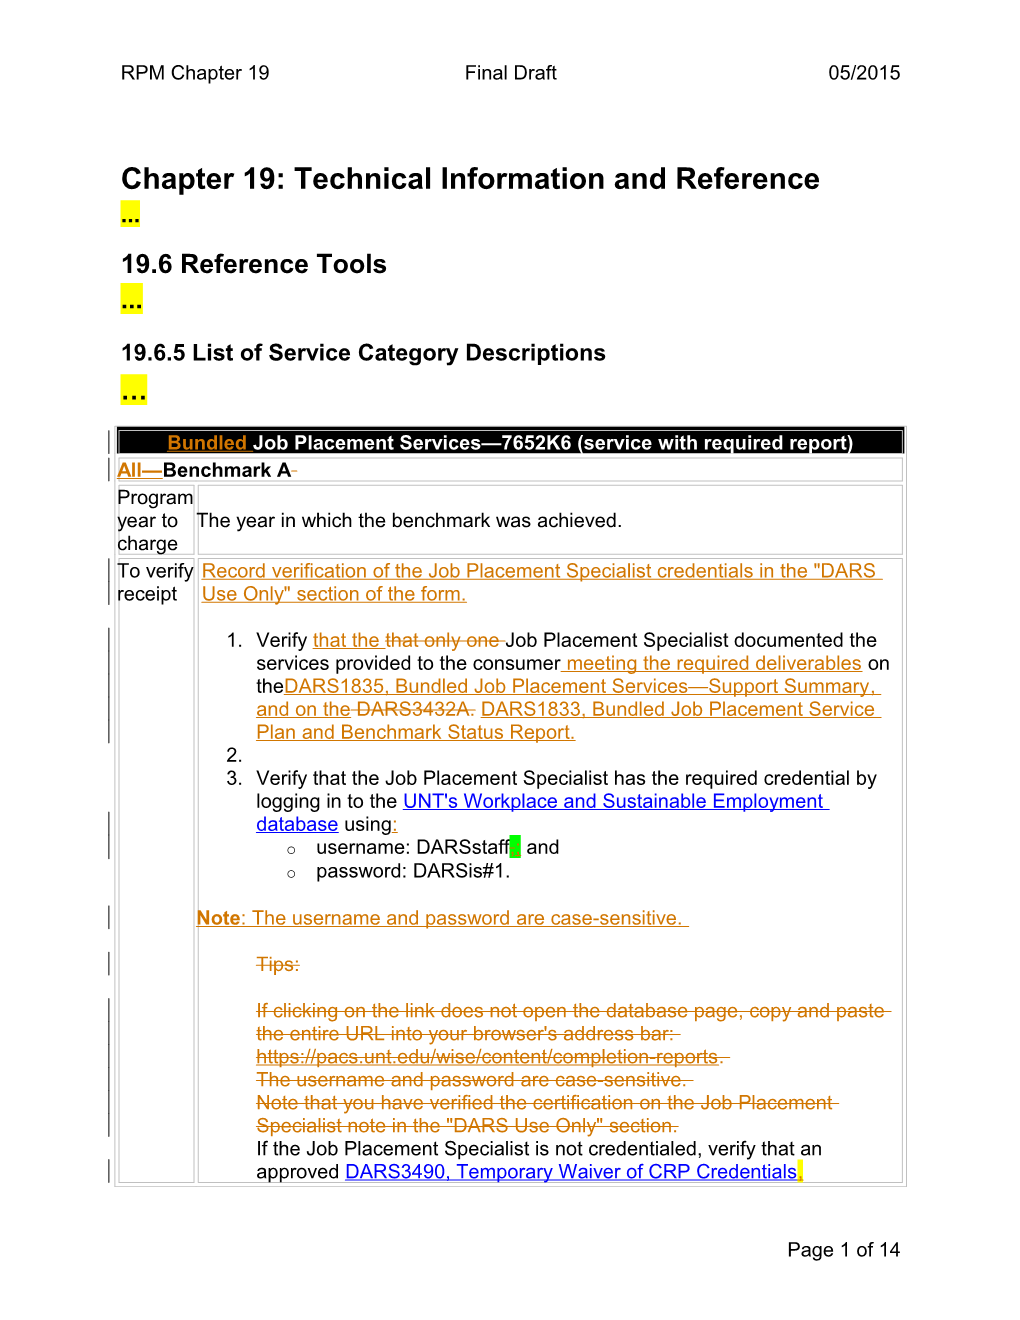 Chapter 19: Technical Information and Reference